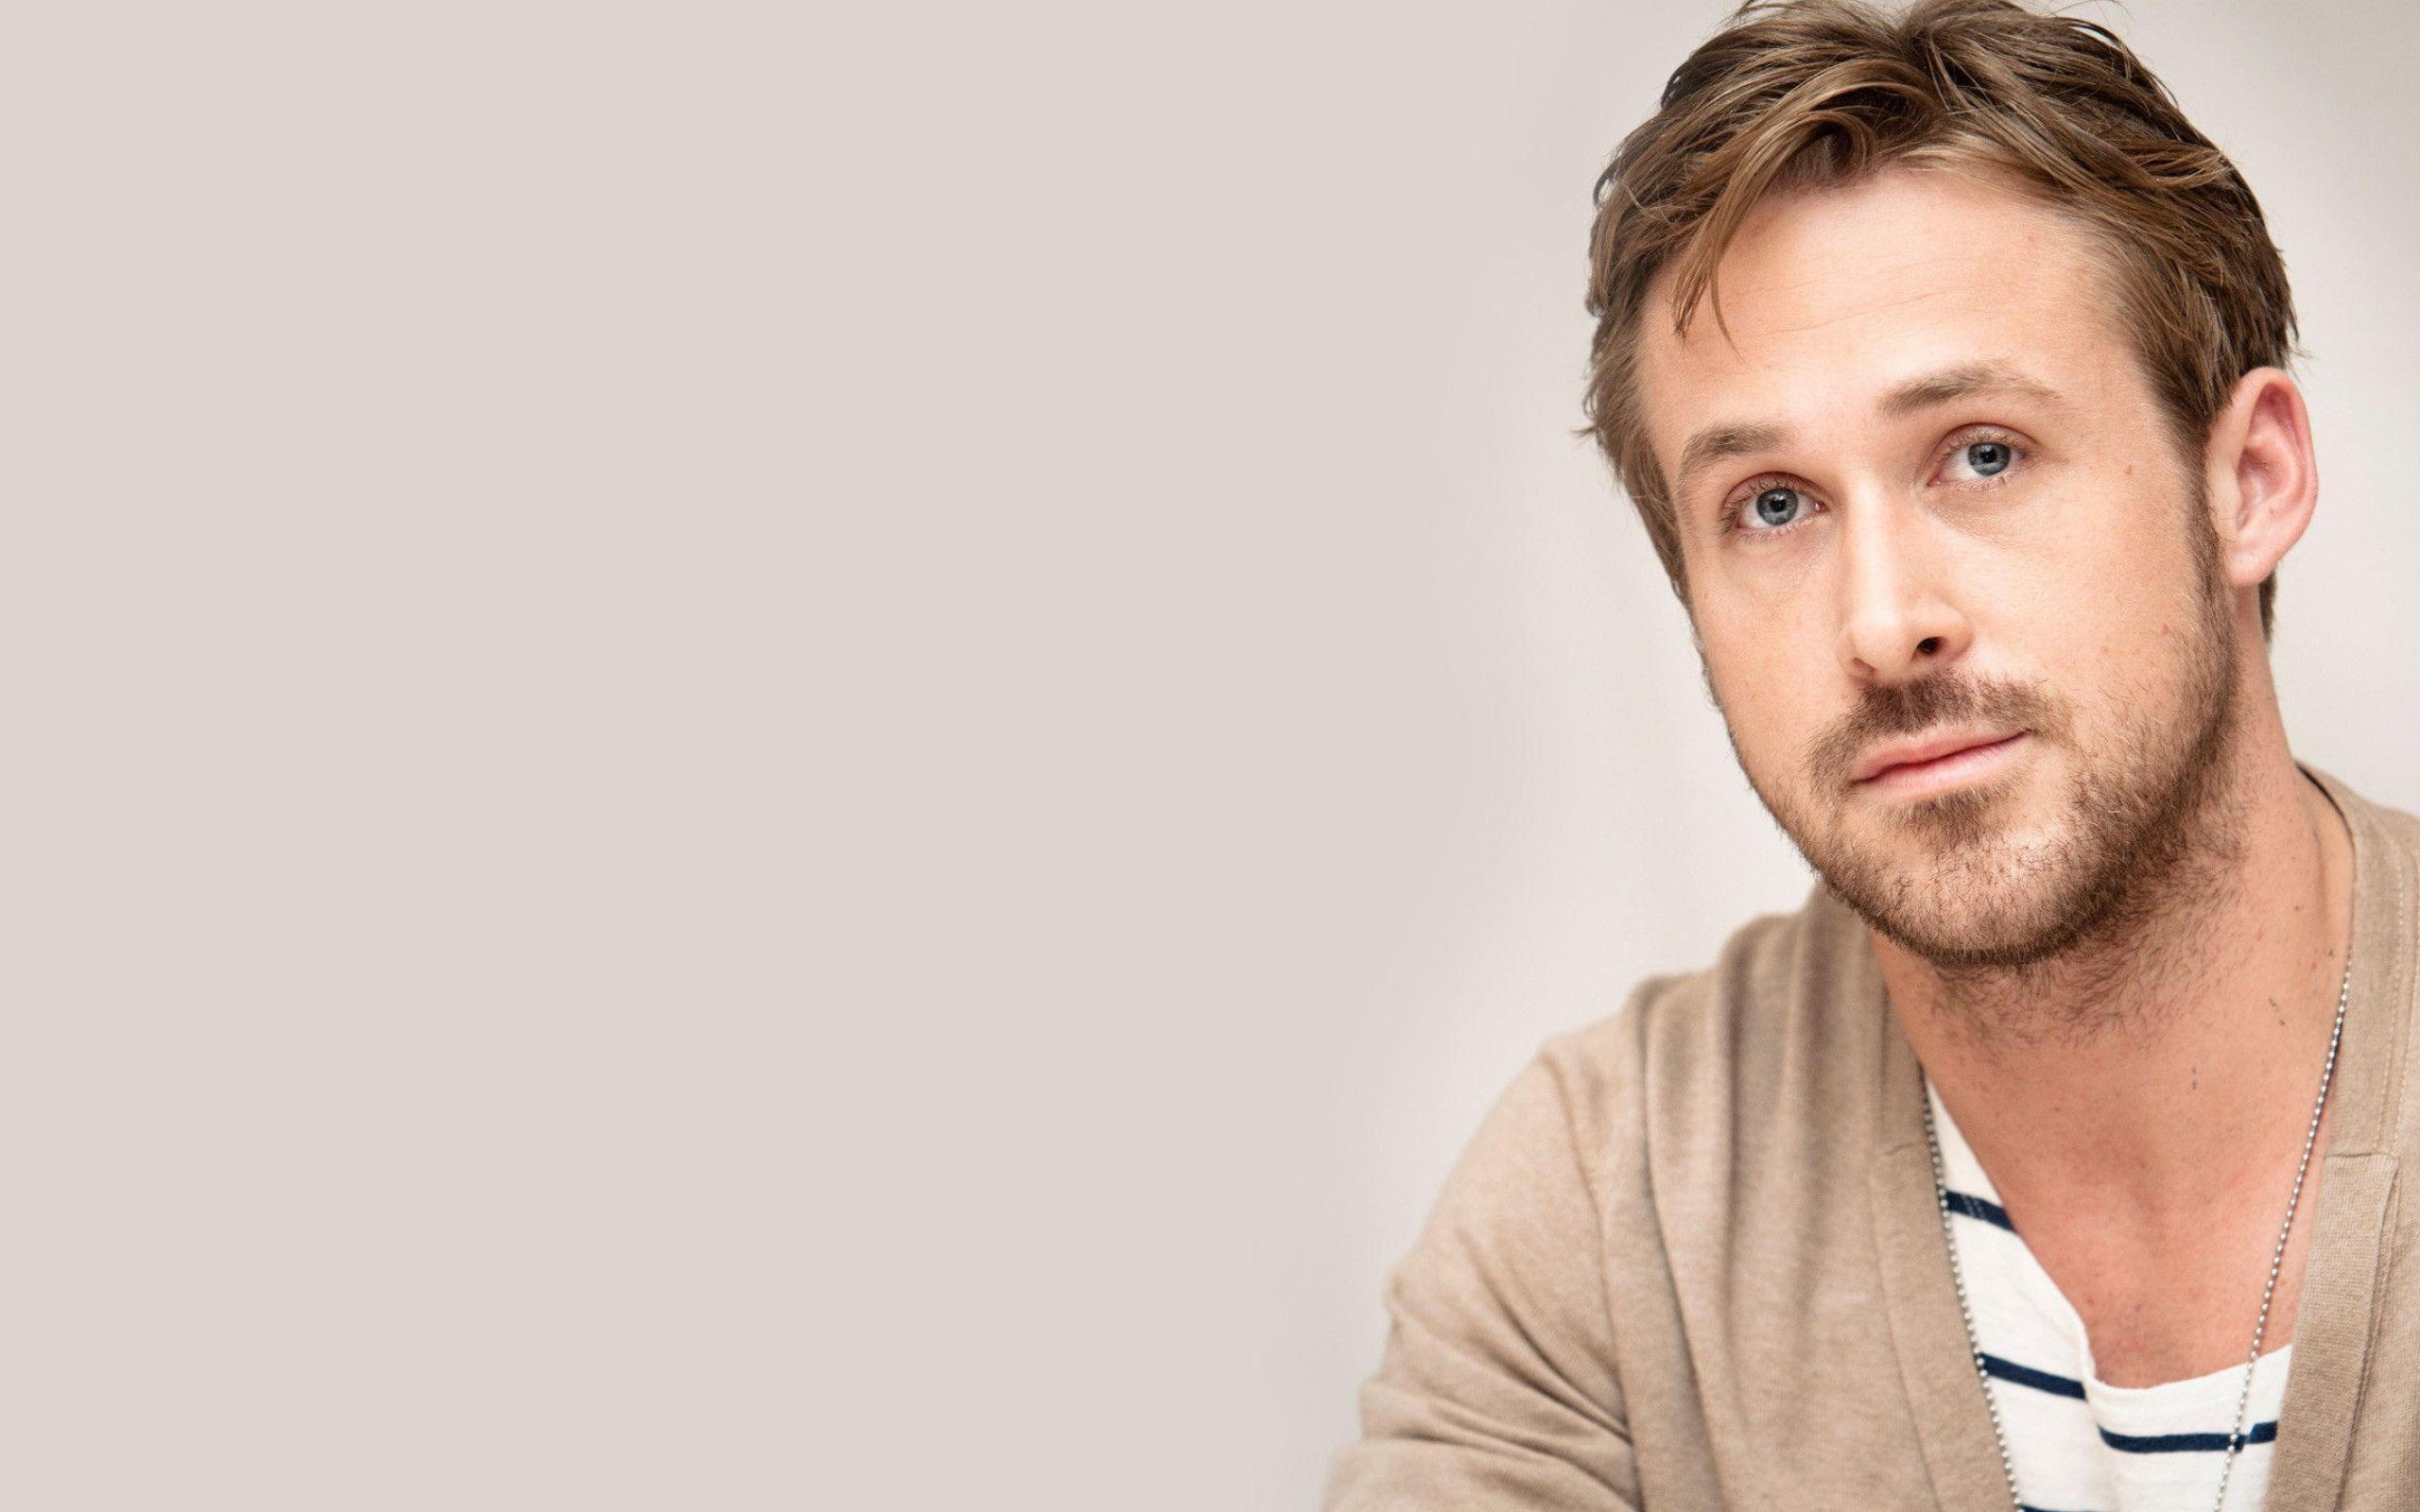 Ryan Gosling: Made directorial debut with Lost River (2014). 2560x1600 HD Wallpaper.